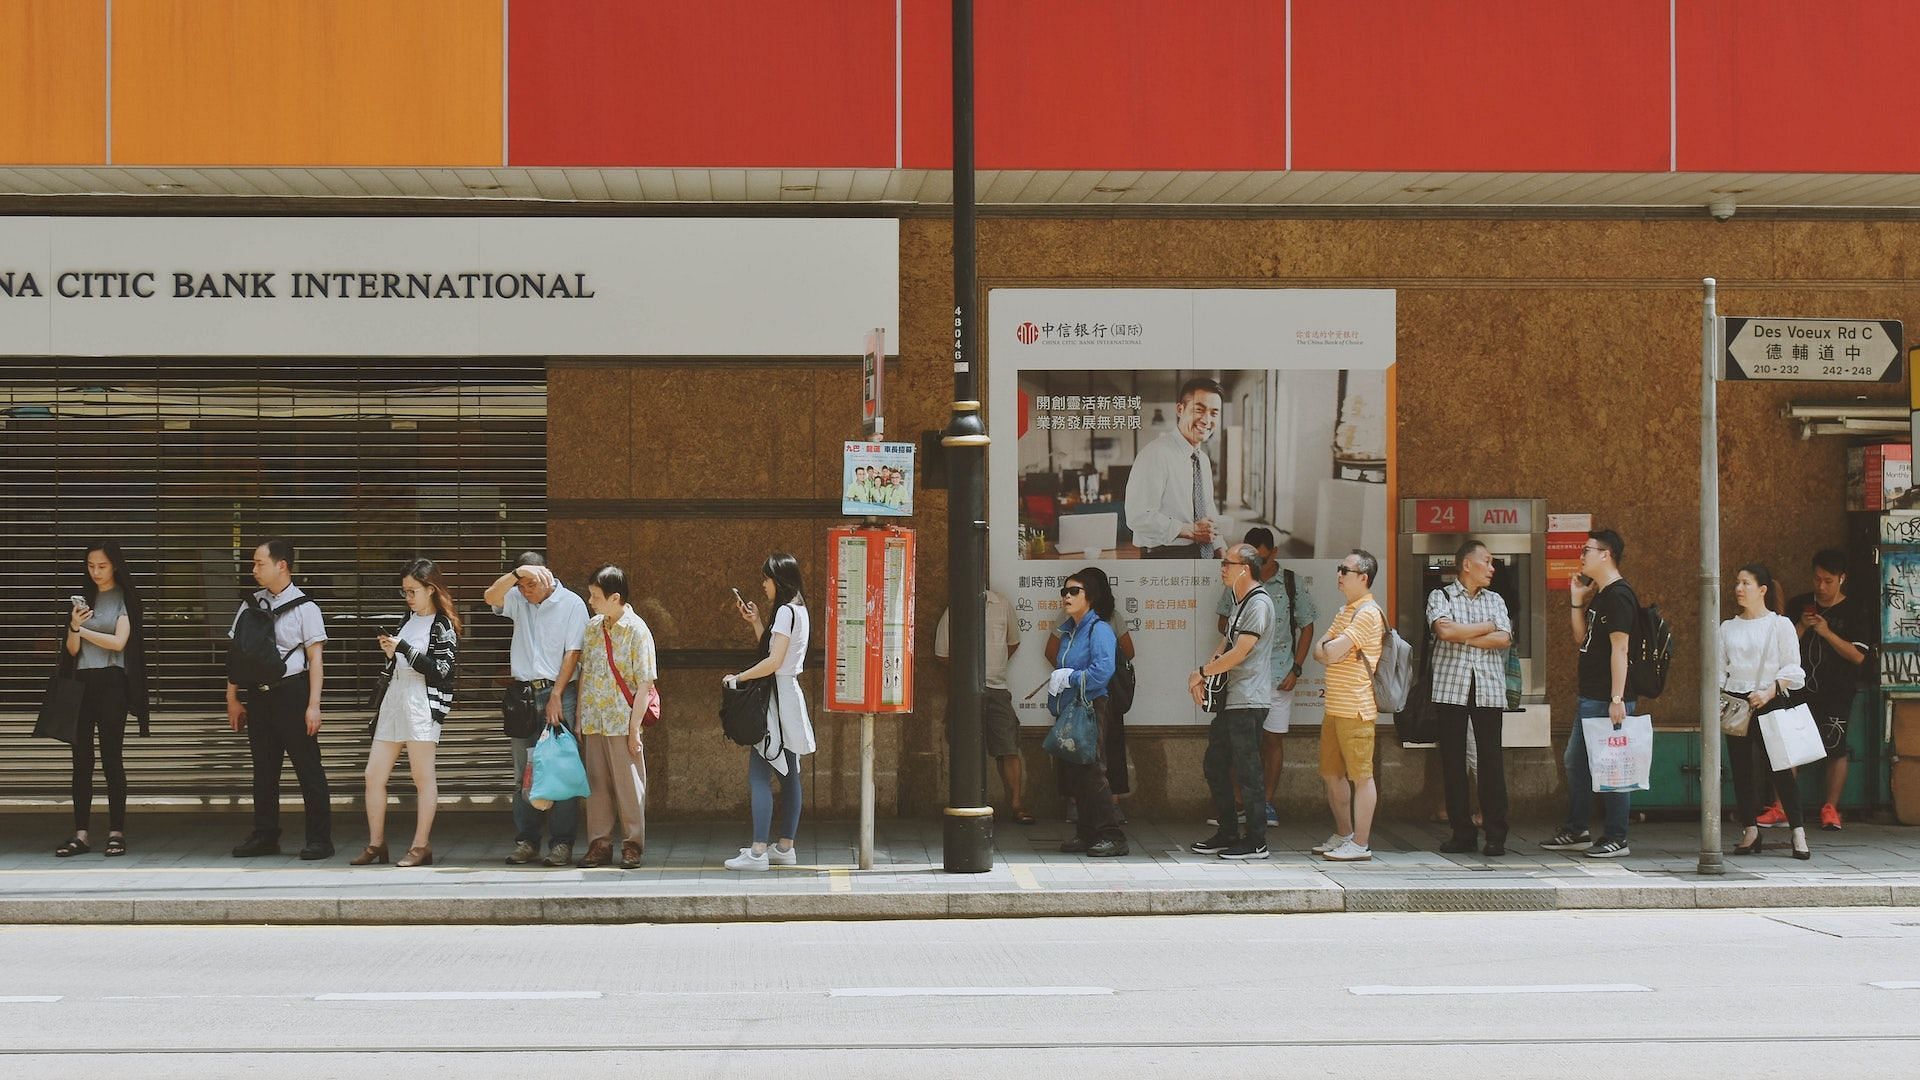 Burn fat by moving around even when waiting in line (Image via Unsplash/HW)